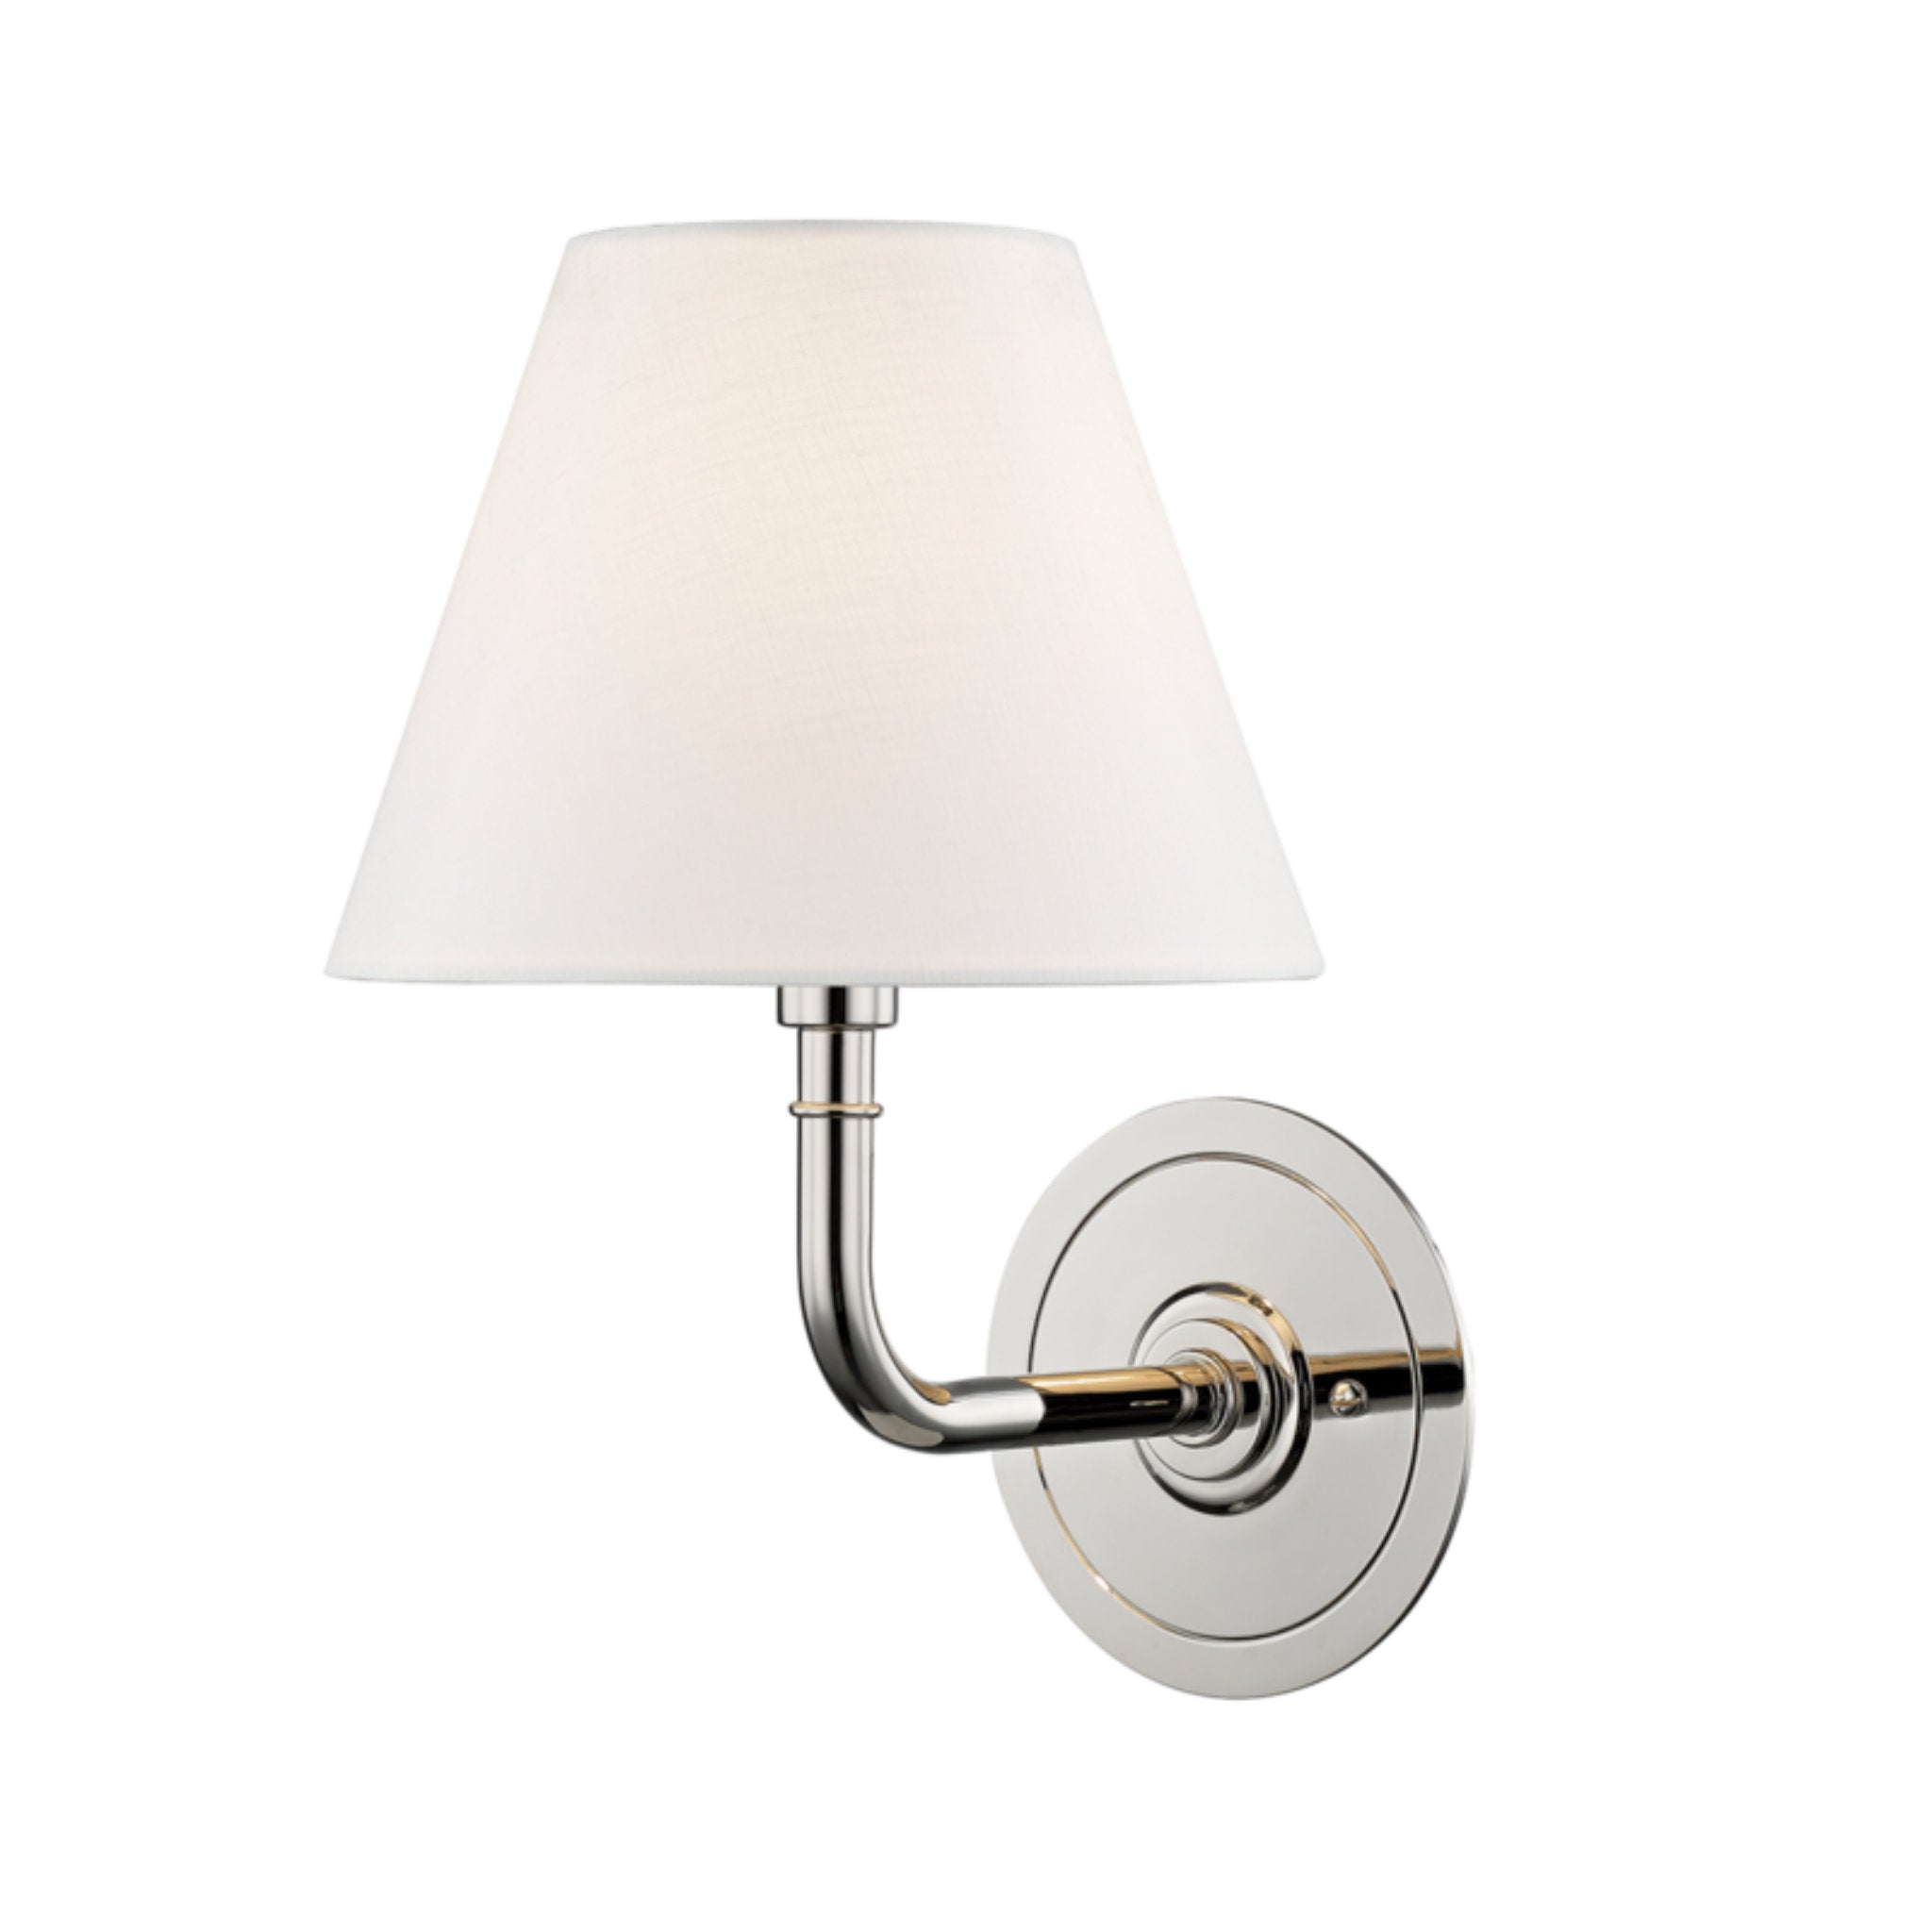 Signature No.1 1 Light Wall Sconce in Polished Nickel by Mark D. Sikes